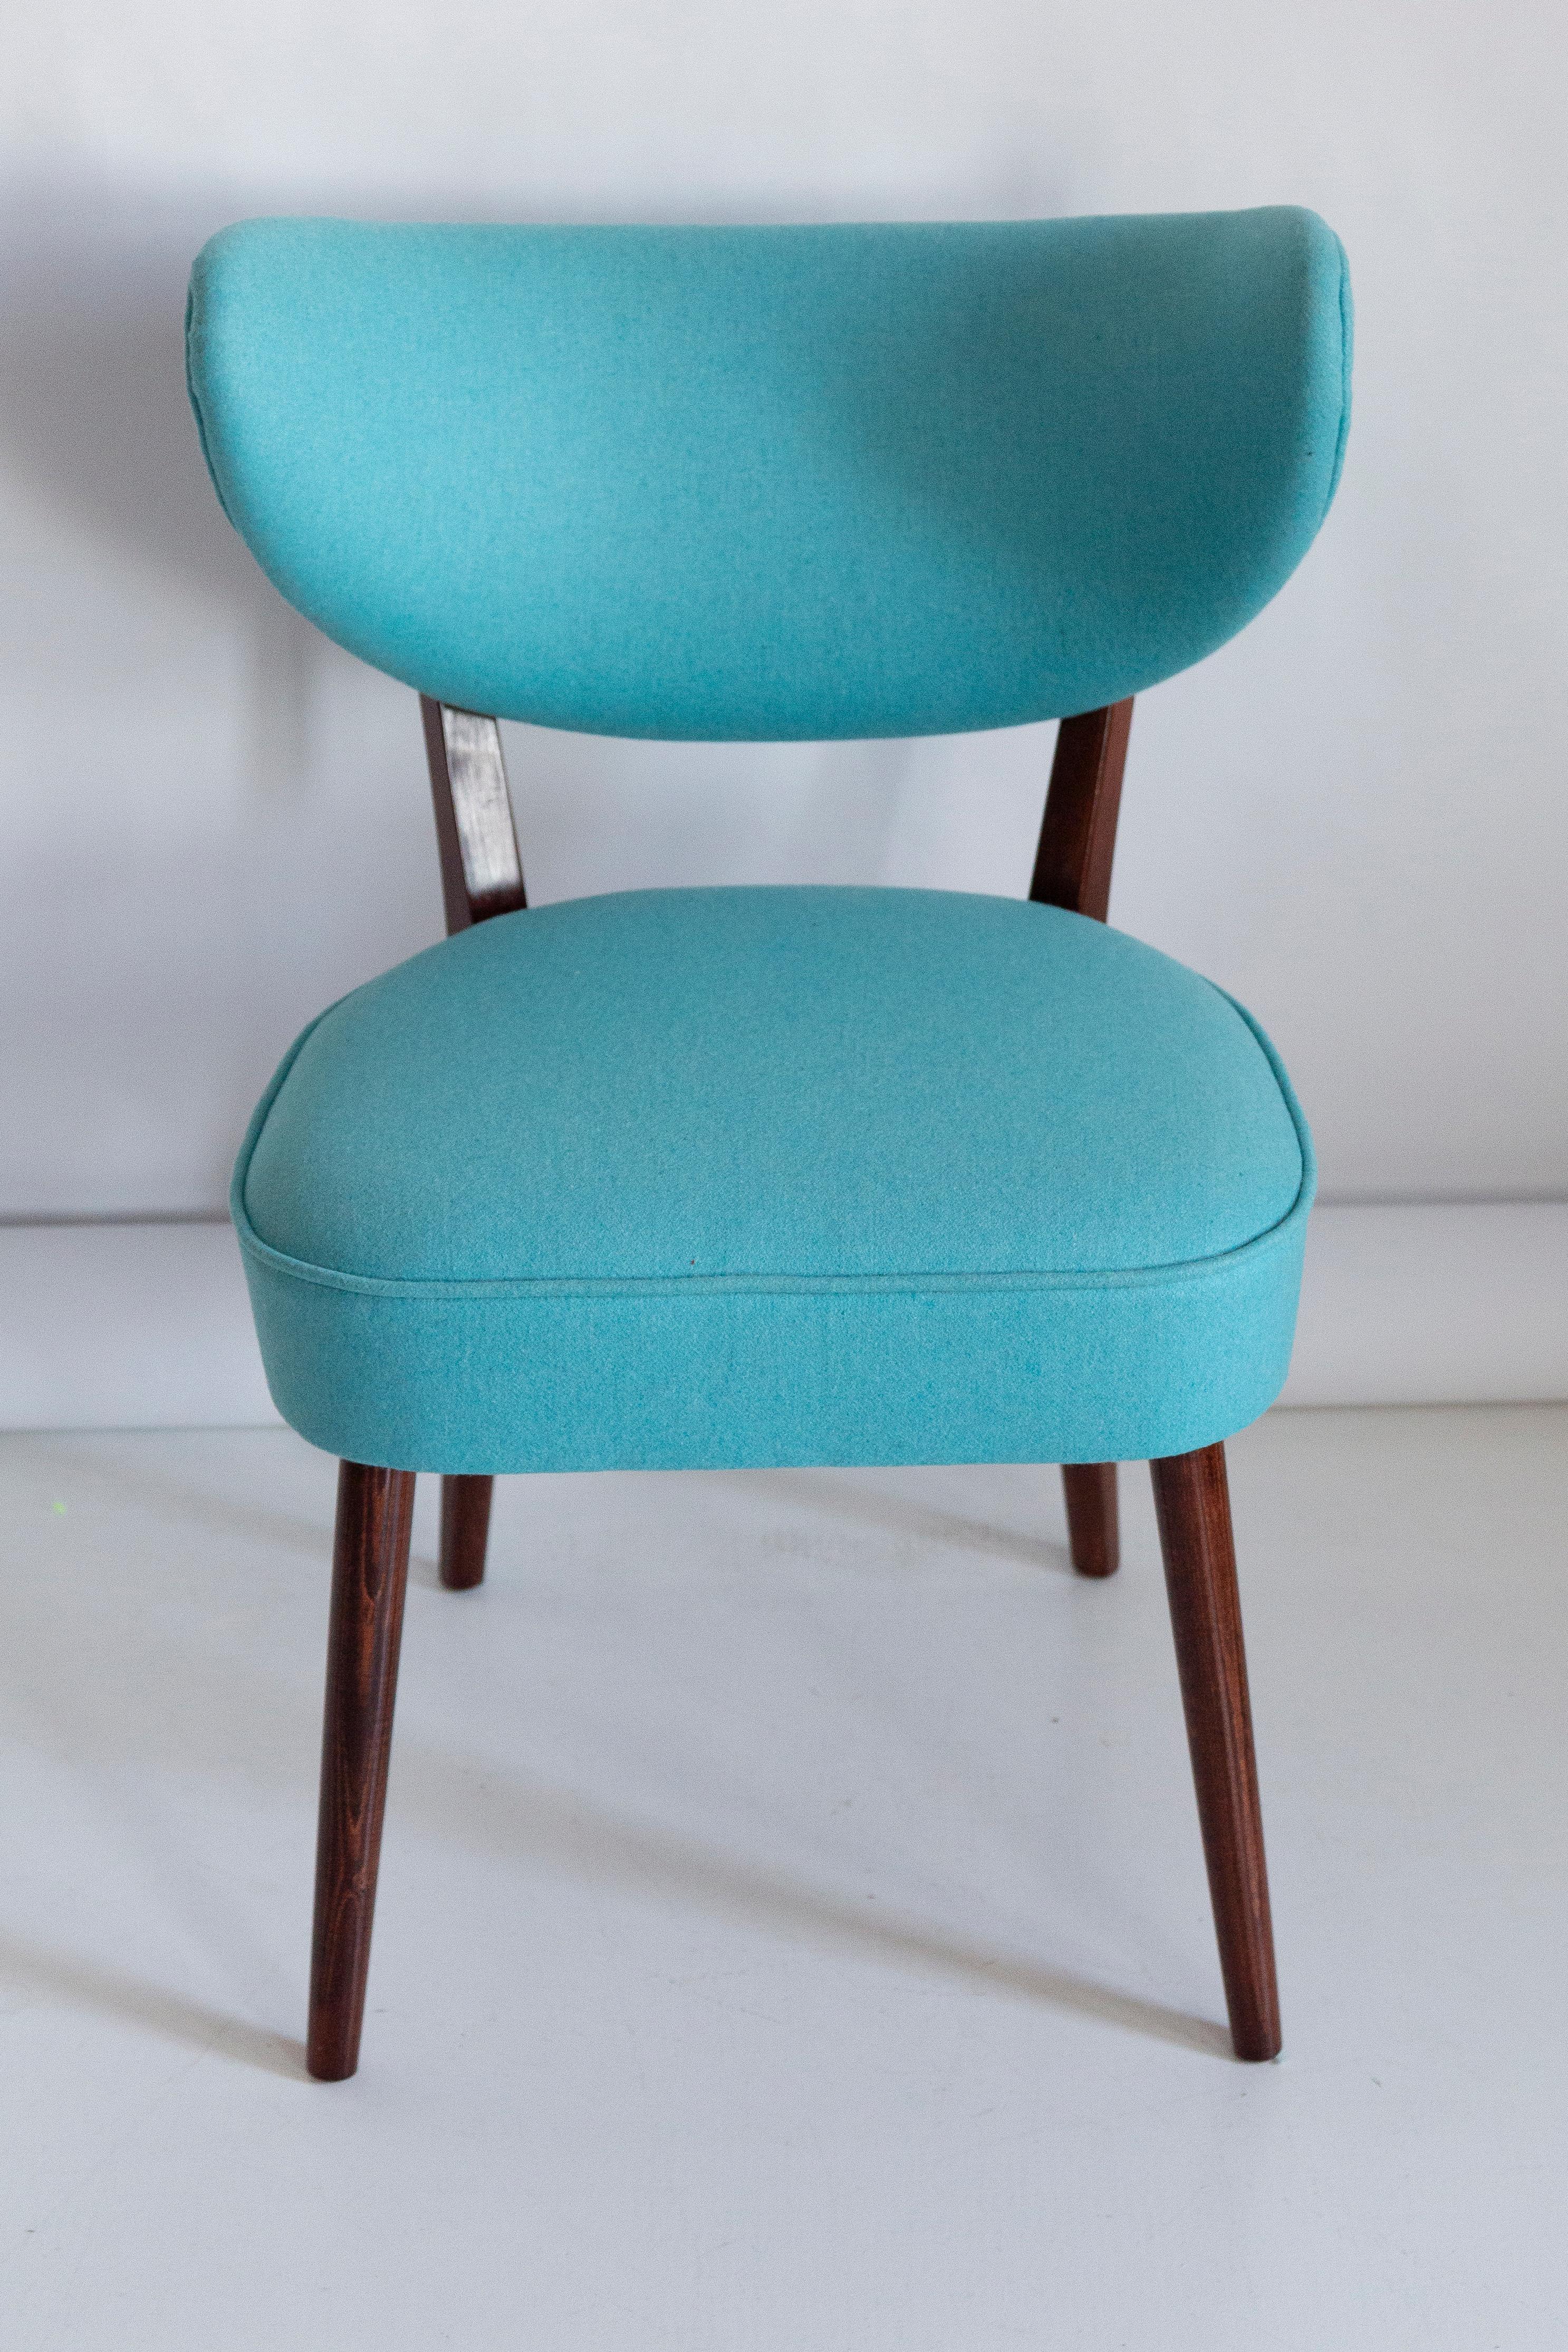 Set of Ten Shell Dining Chairs, Turquoise Wool, by Vintola Studio, Europe. For Sale 2